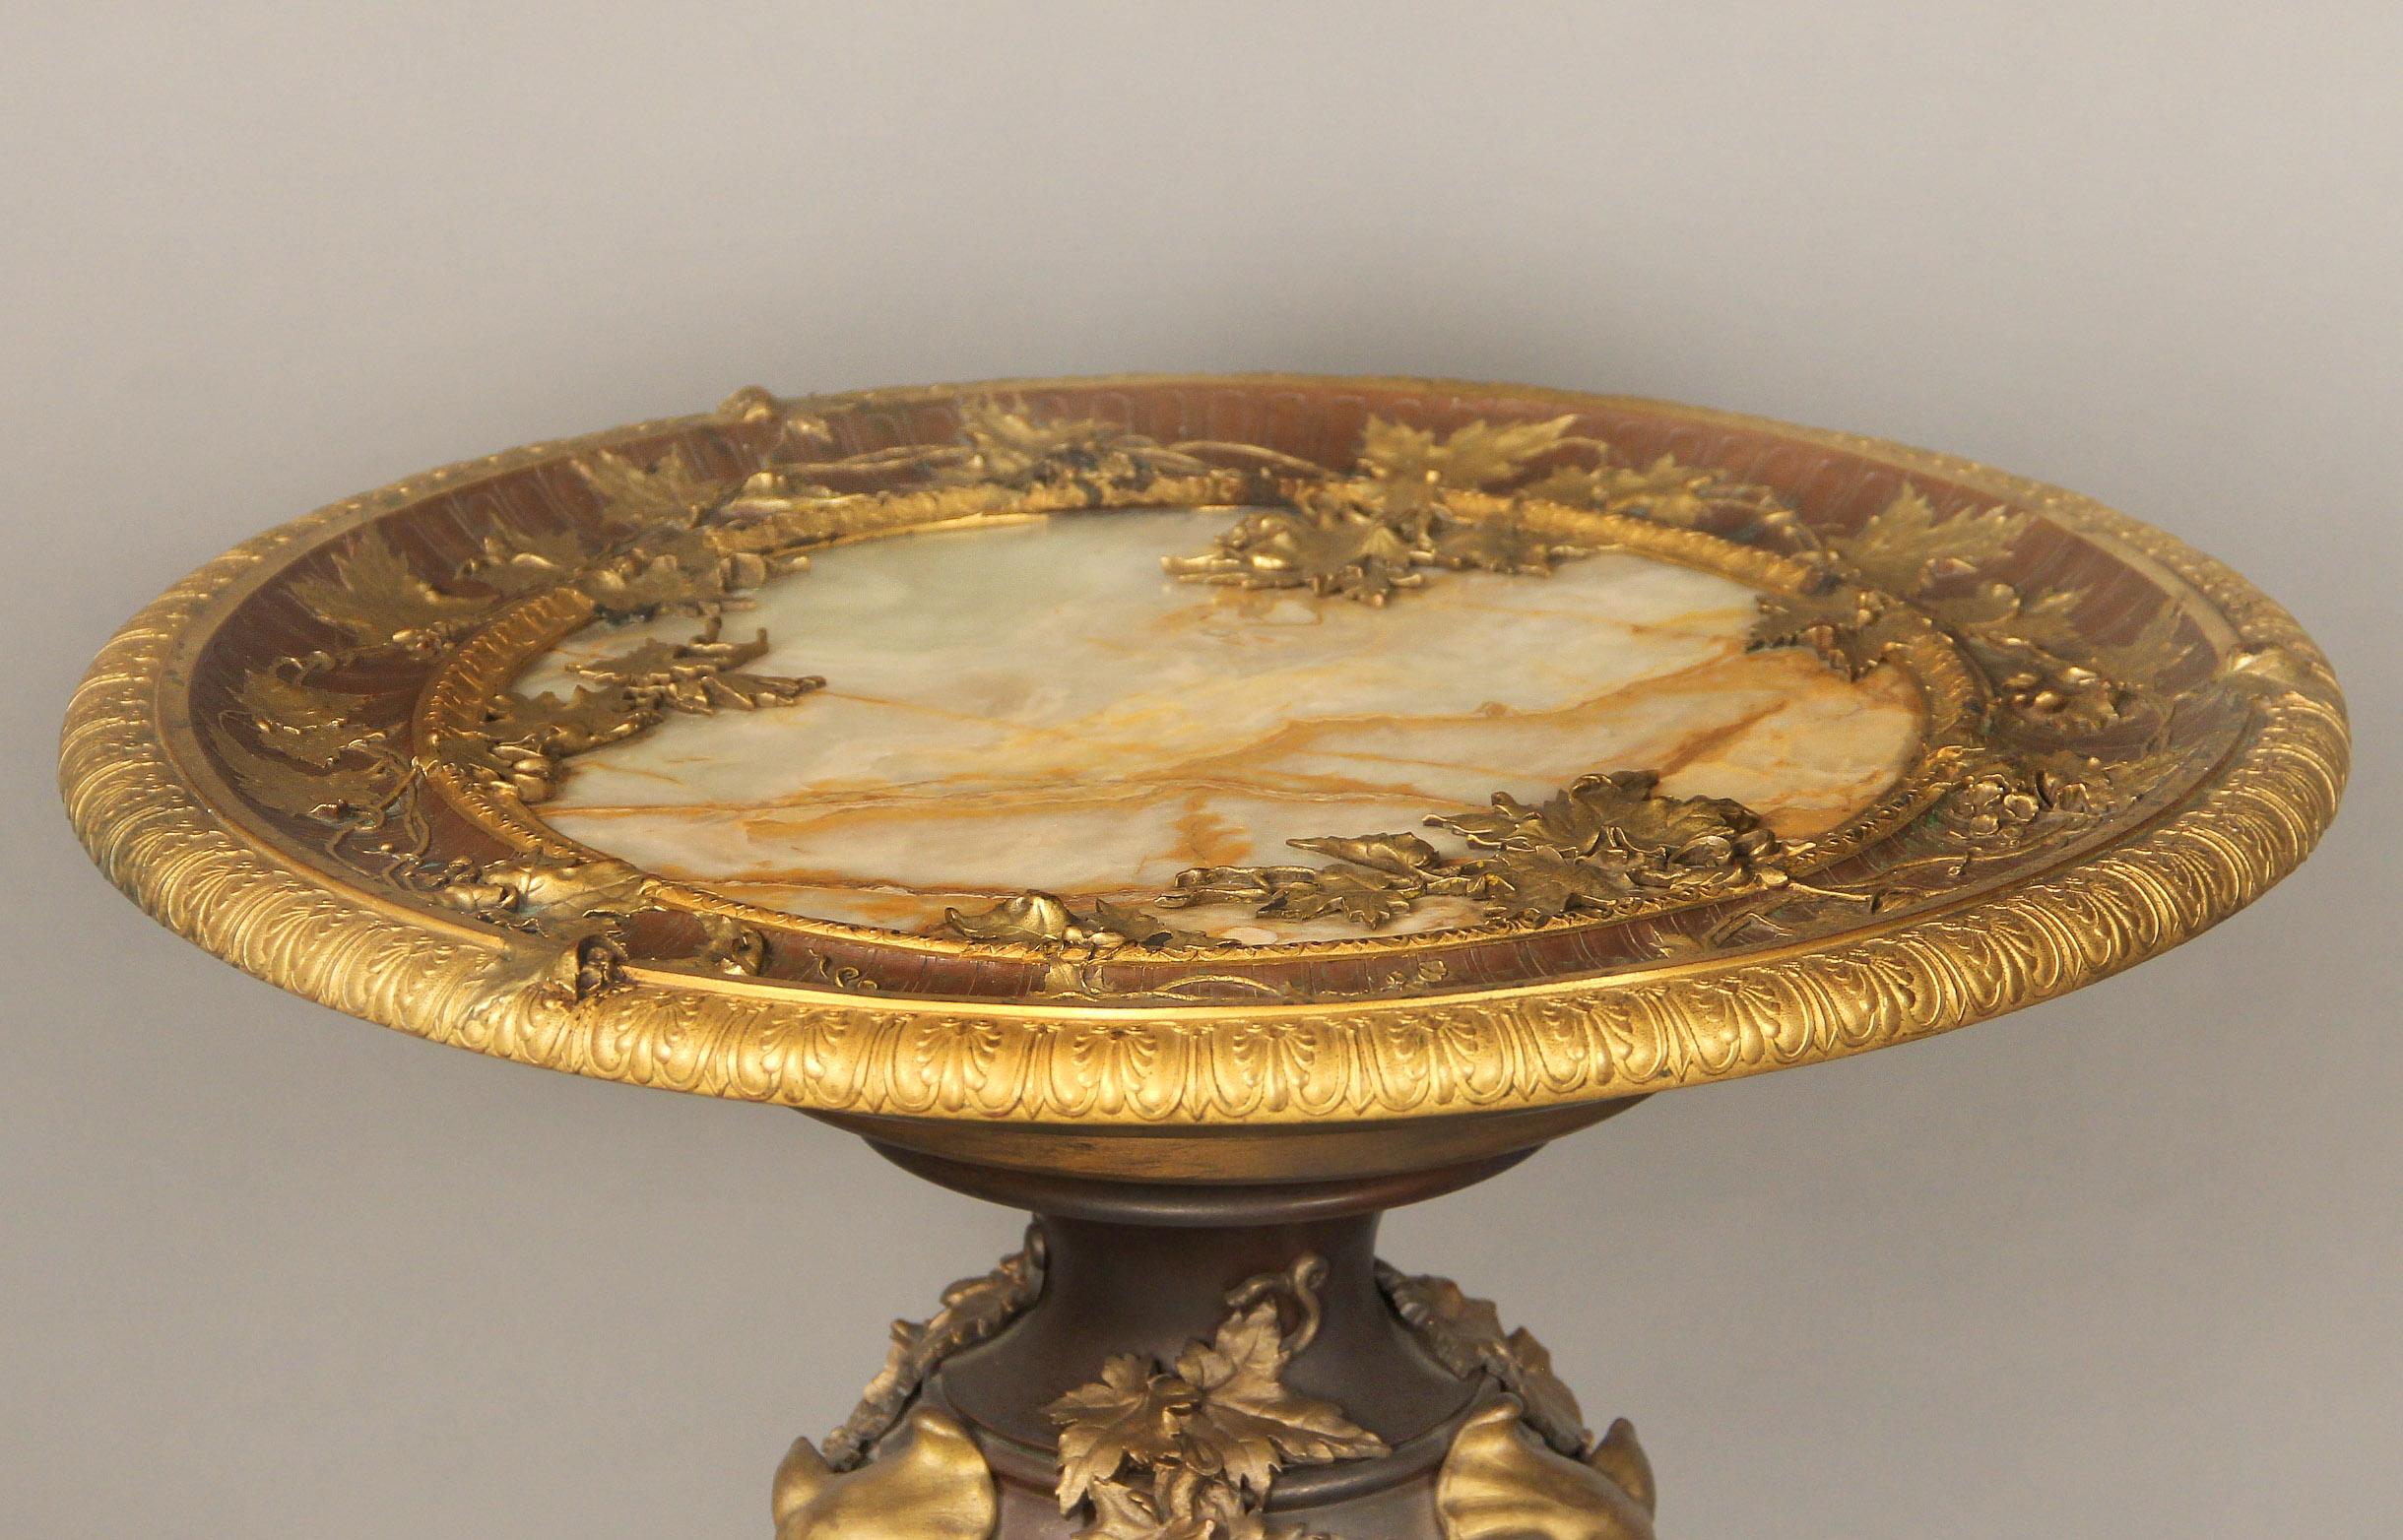 An Interesting and Rare Late 19th Century Bronze and Onyx “Athenian” Pedestal Table By Georges Servant

Georges Emile Henri Servant

The removable gilt polychrome bronze and onyx round top very finely decorated with vines, leaves and foliage,